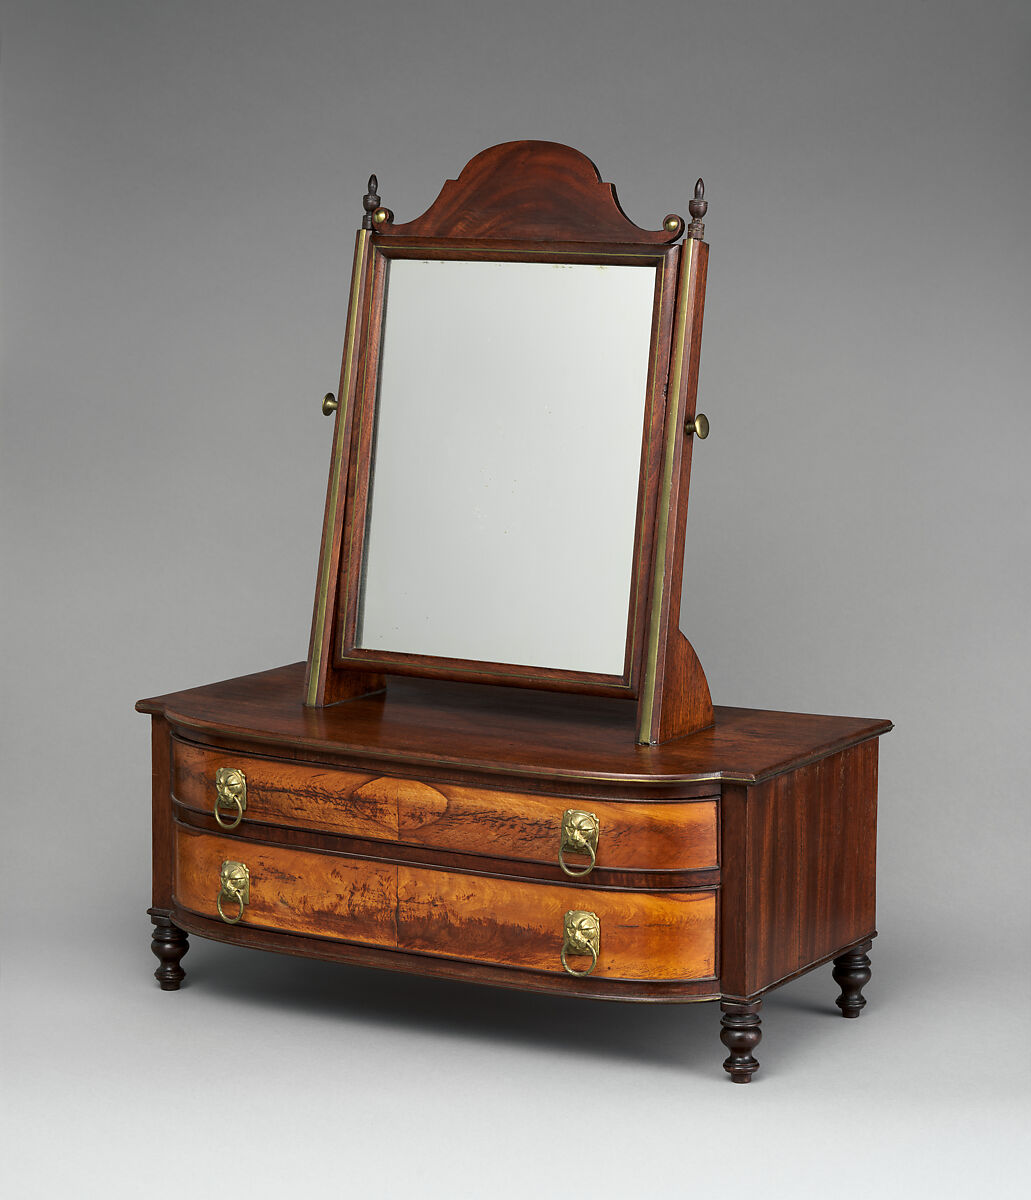 Dressing glass, Attributed to Thomas Seymour (1771–1848), Mahogany, mahogany and birch veneers, and glass with white pine, American 